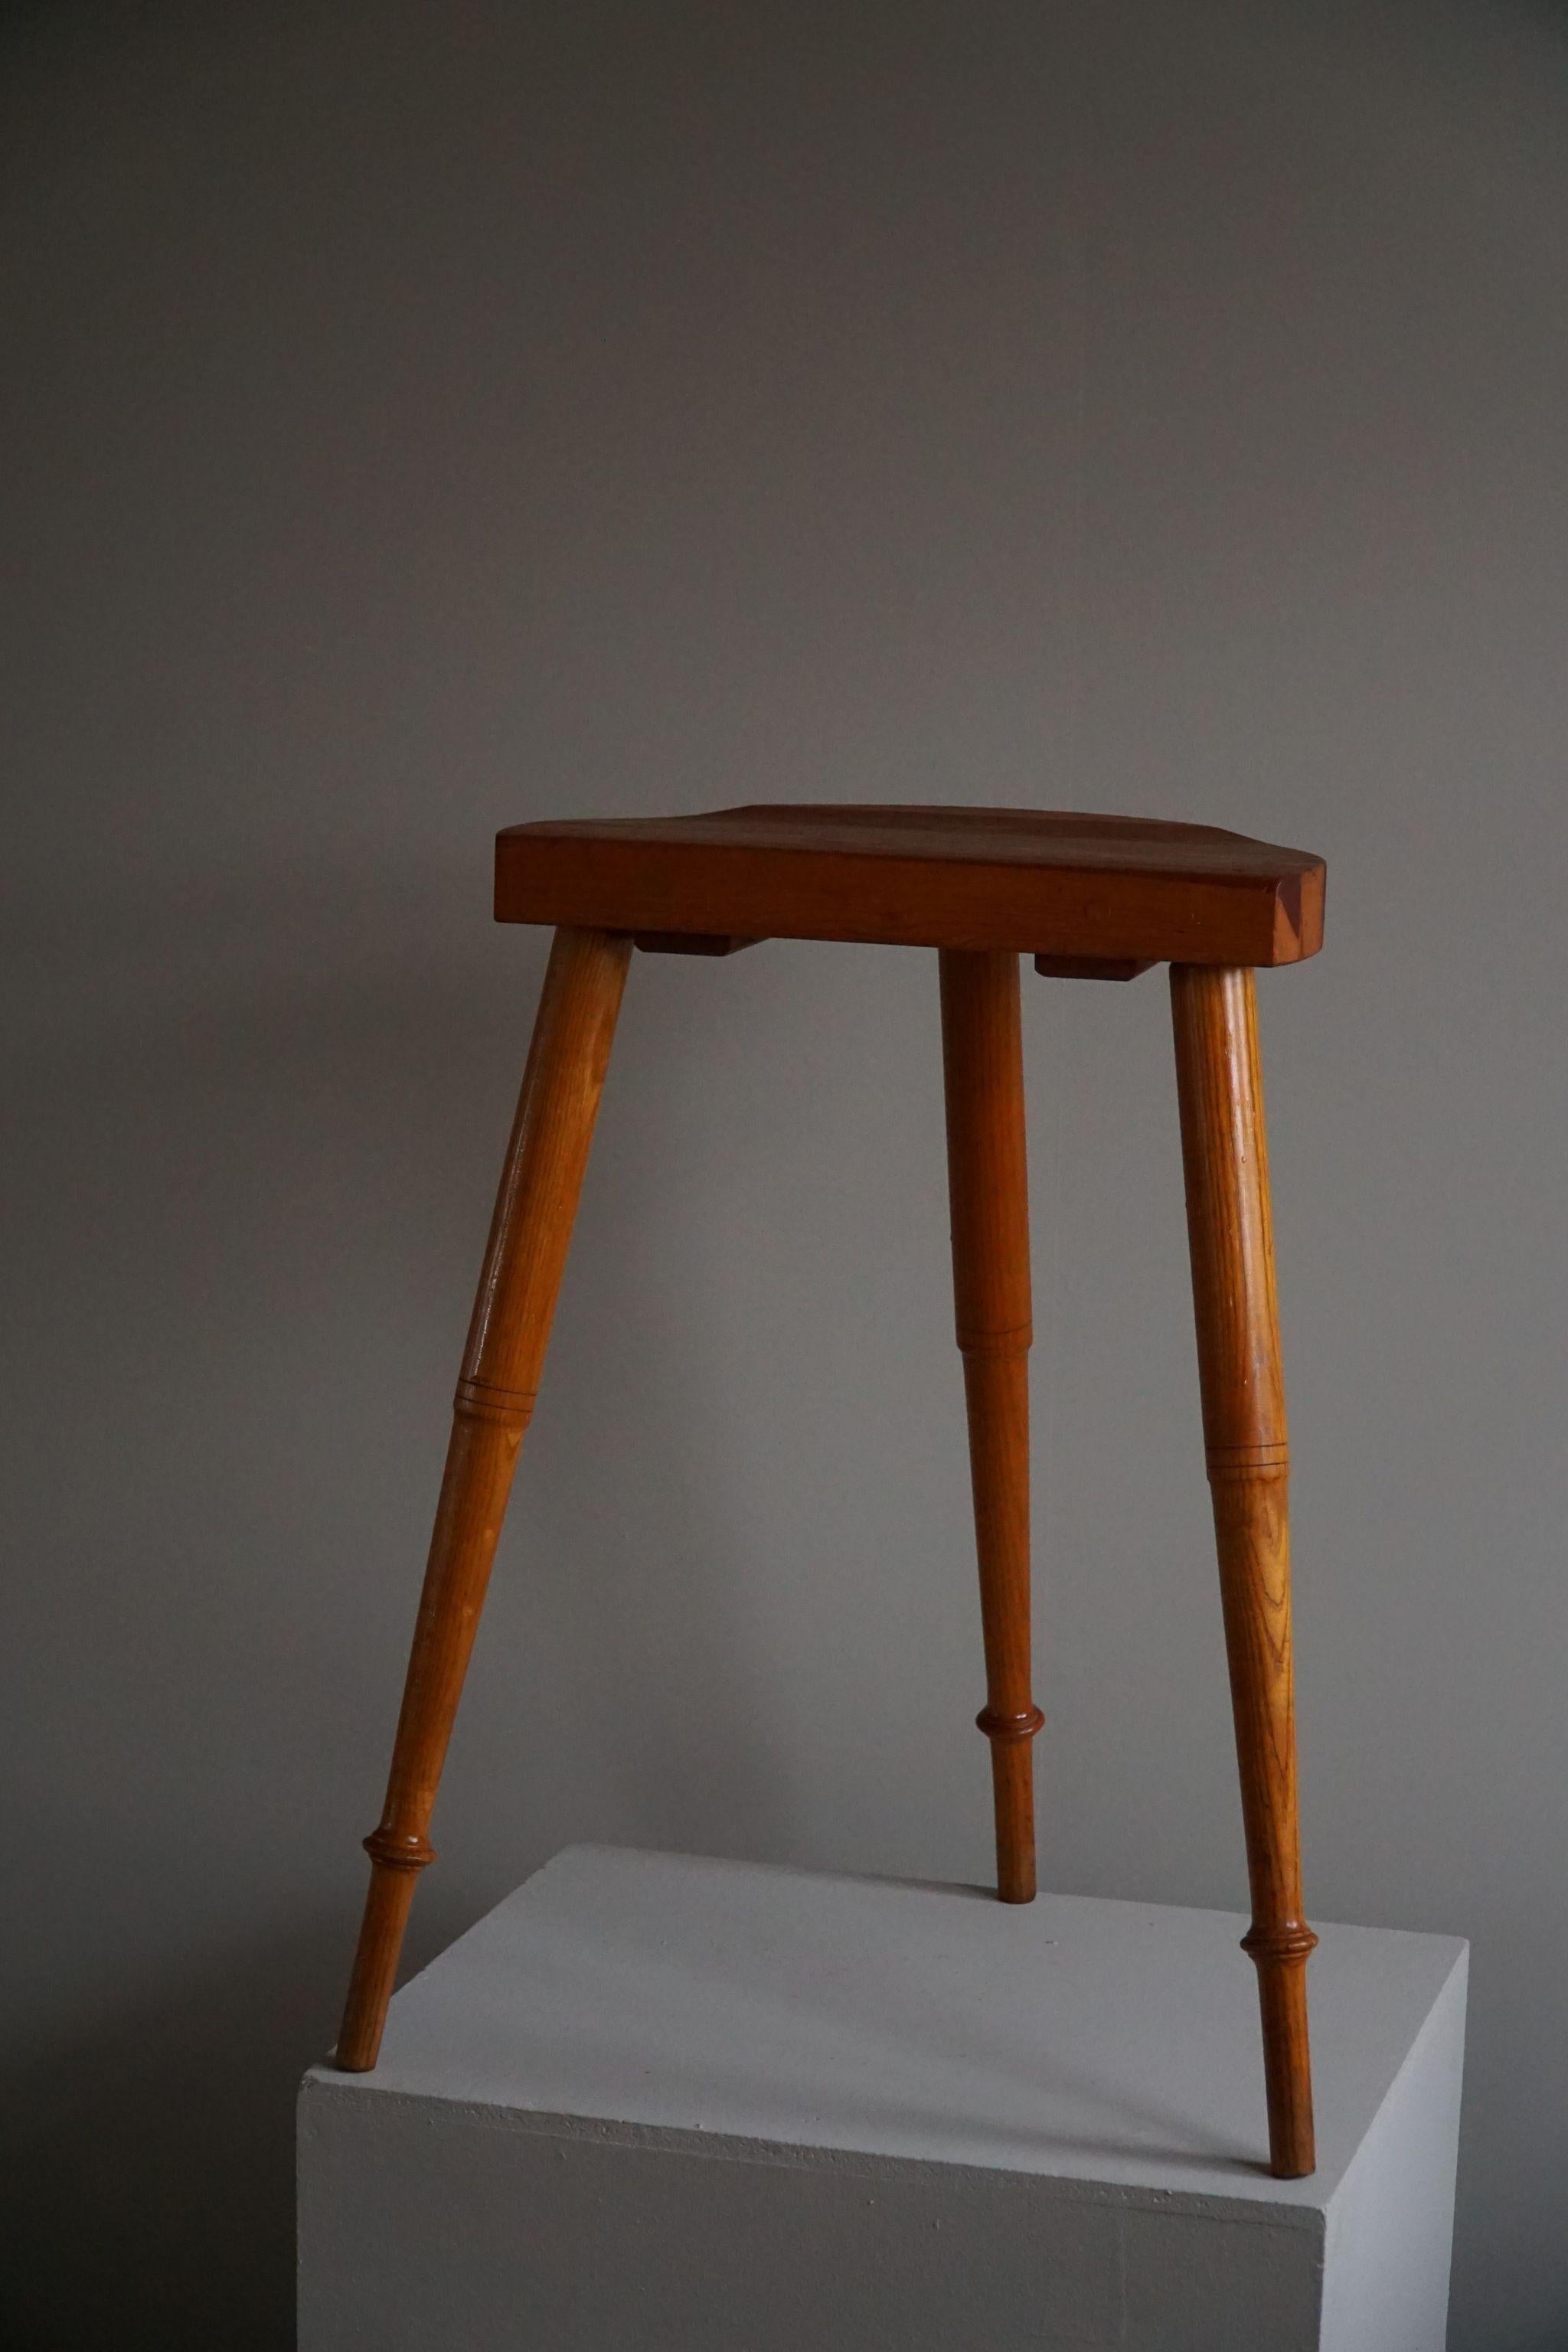 20th Century Tall Tripod Stool in Solid Pine, by a Danish Cabinetmaker, Mid Century, Ca 1960s For Sale